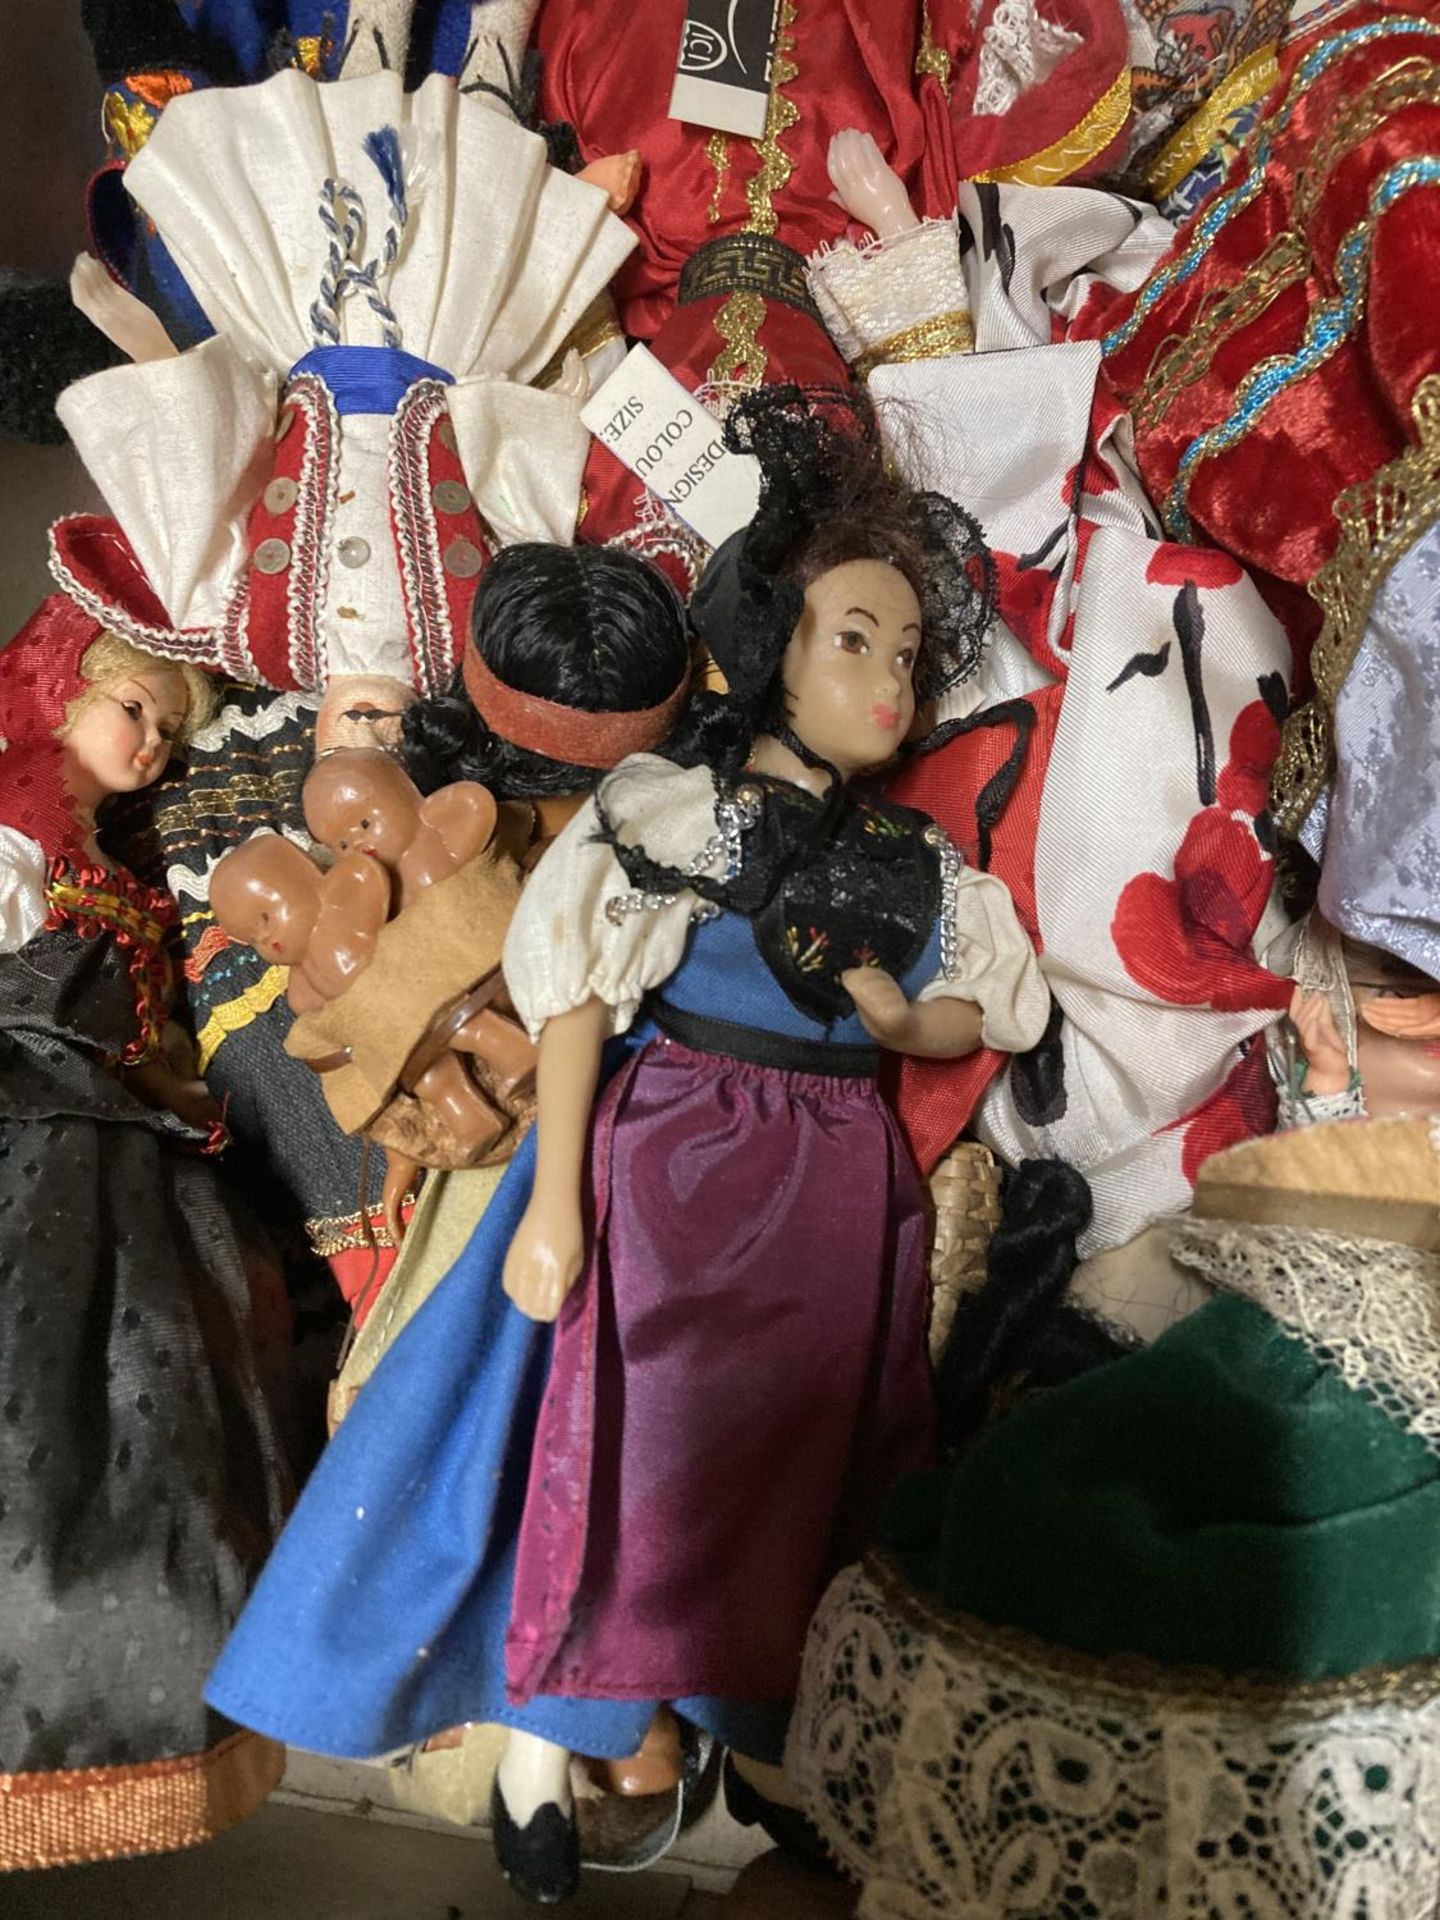 A LARGE COLLECTION OF DOLLS FROM AROUND THE WORLD - Image 2 of 5